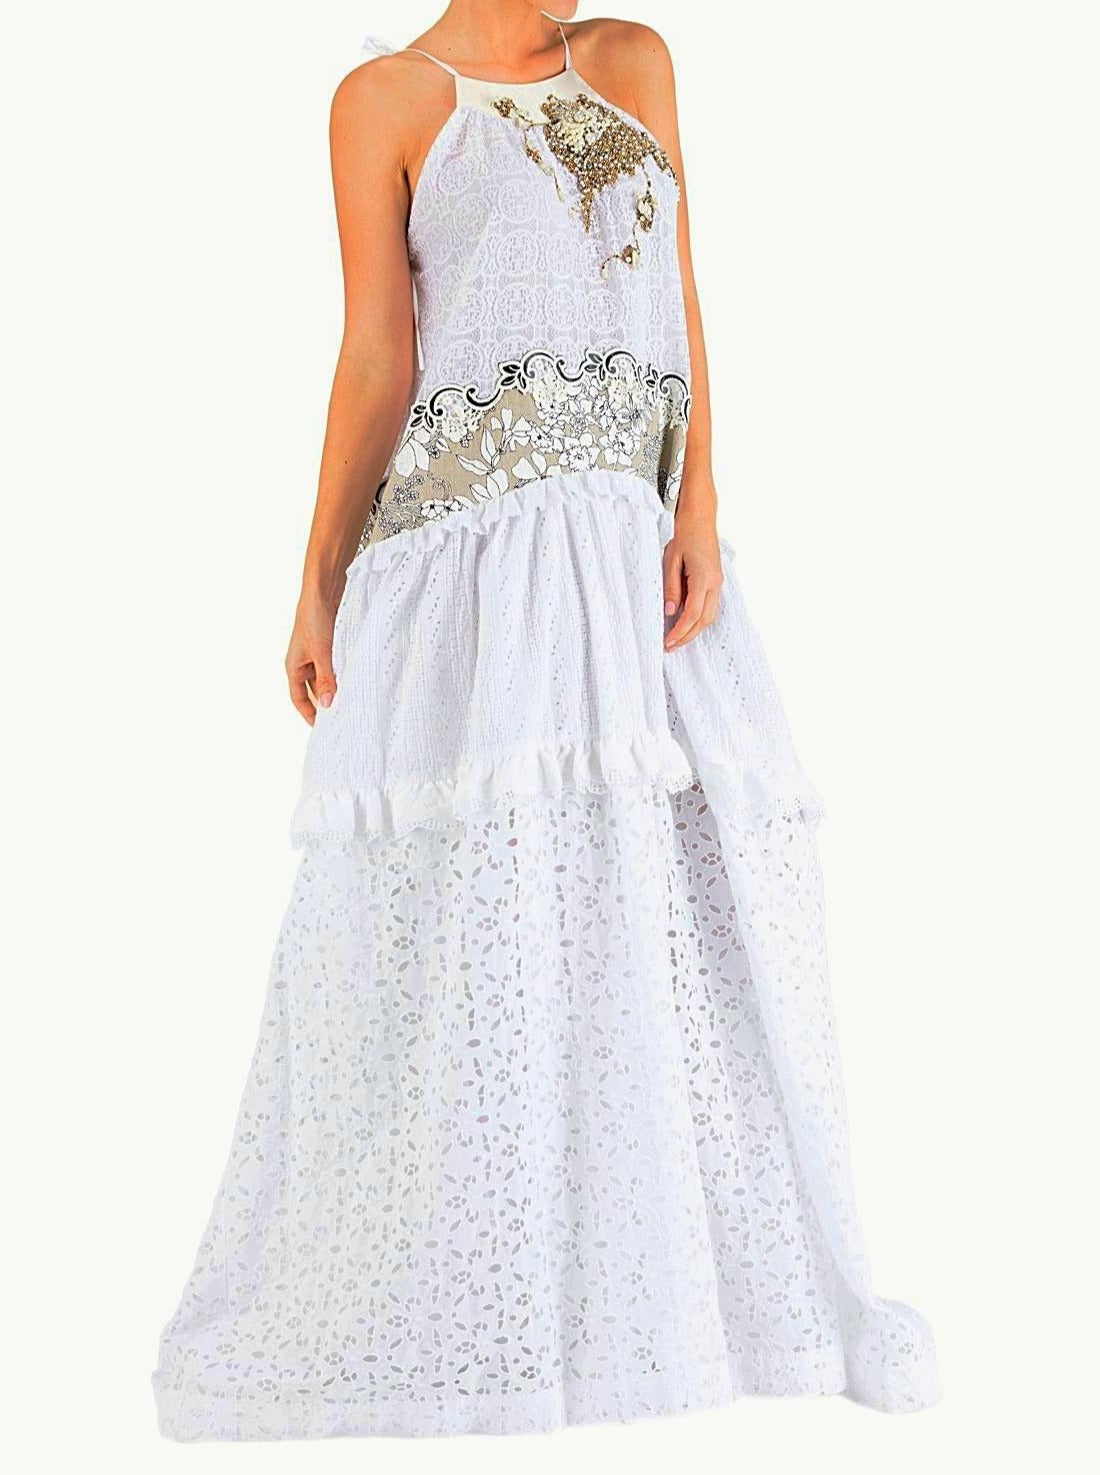 Pearls White Dress - 80% off